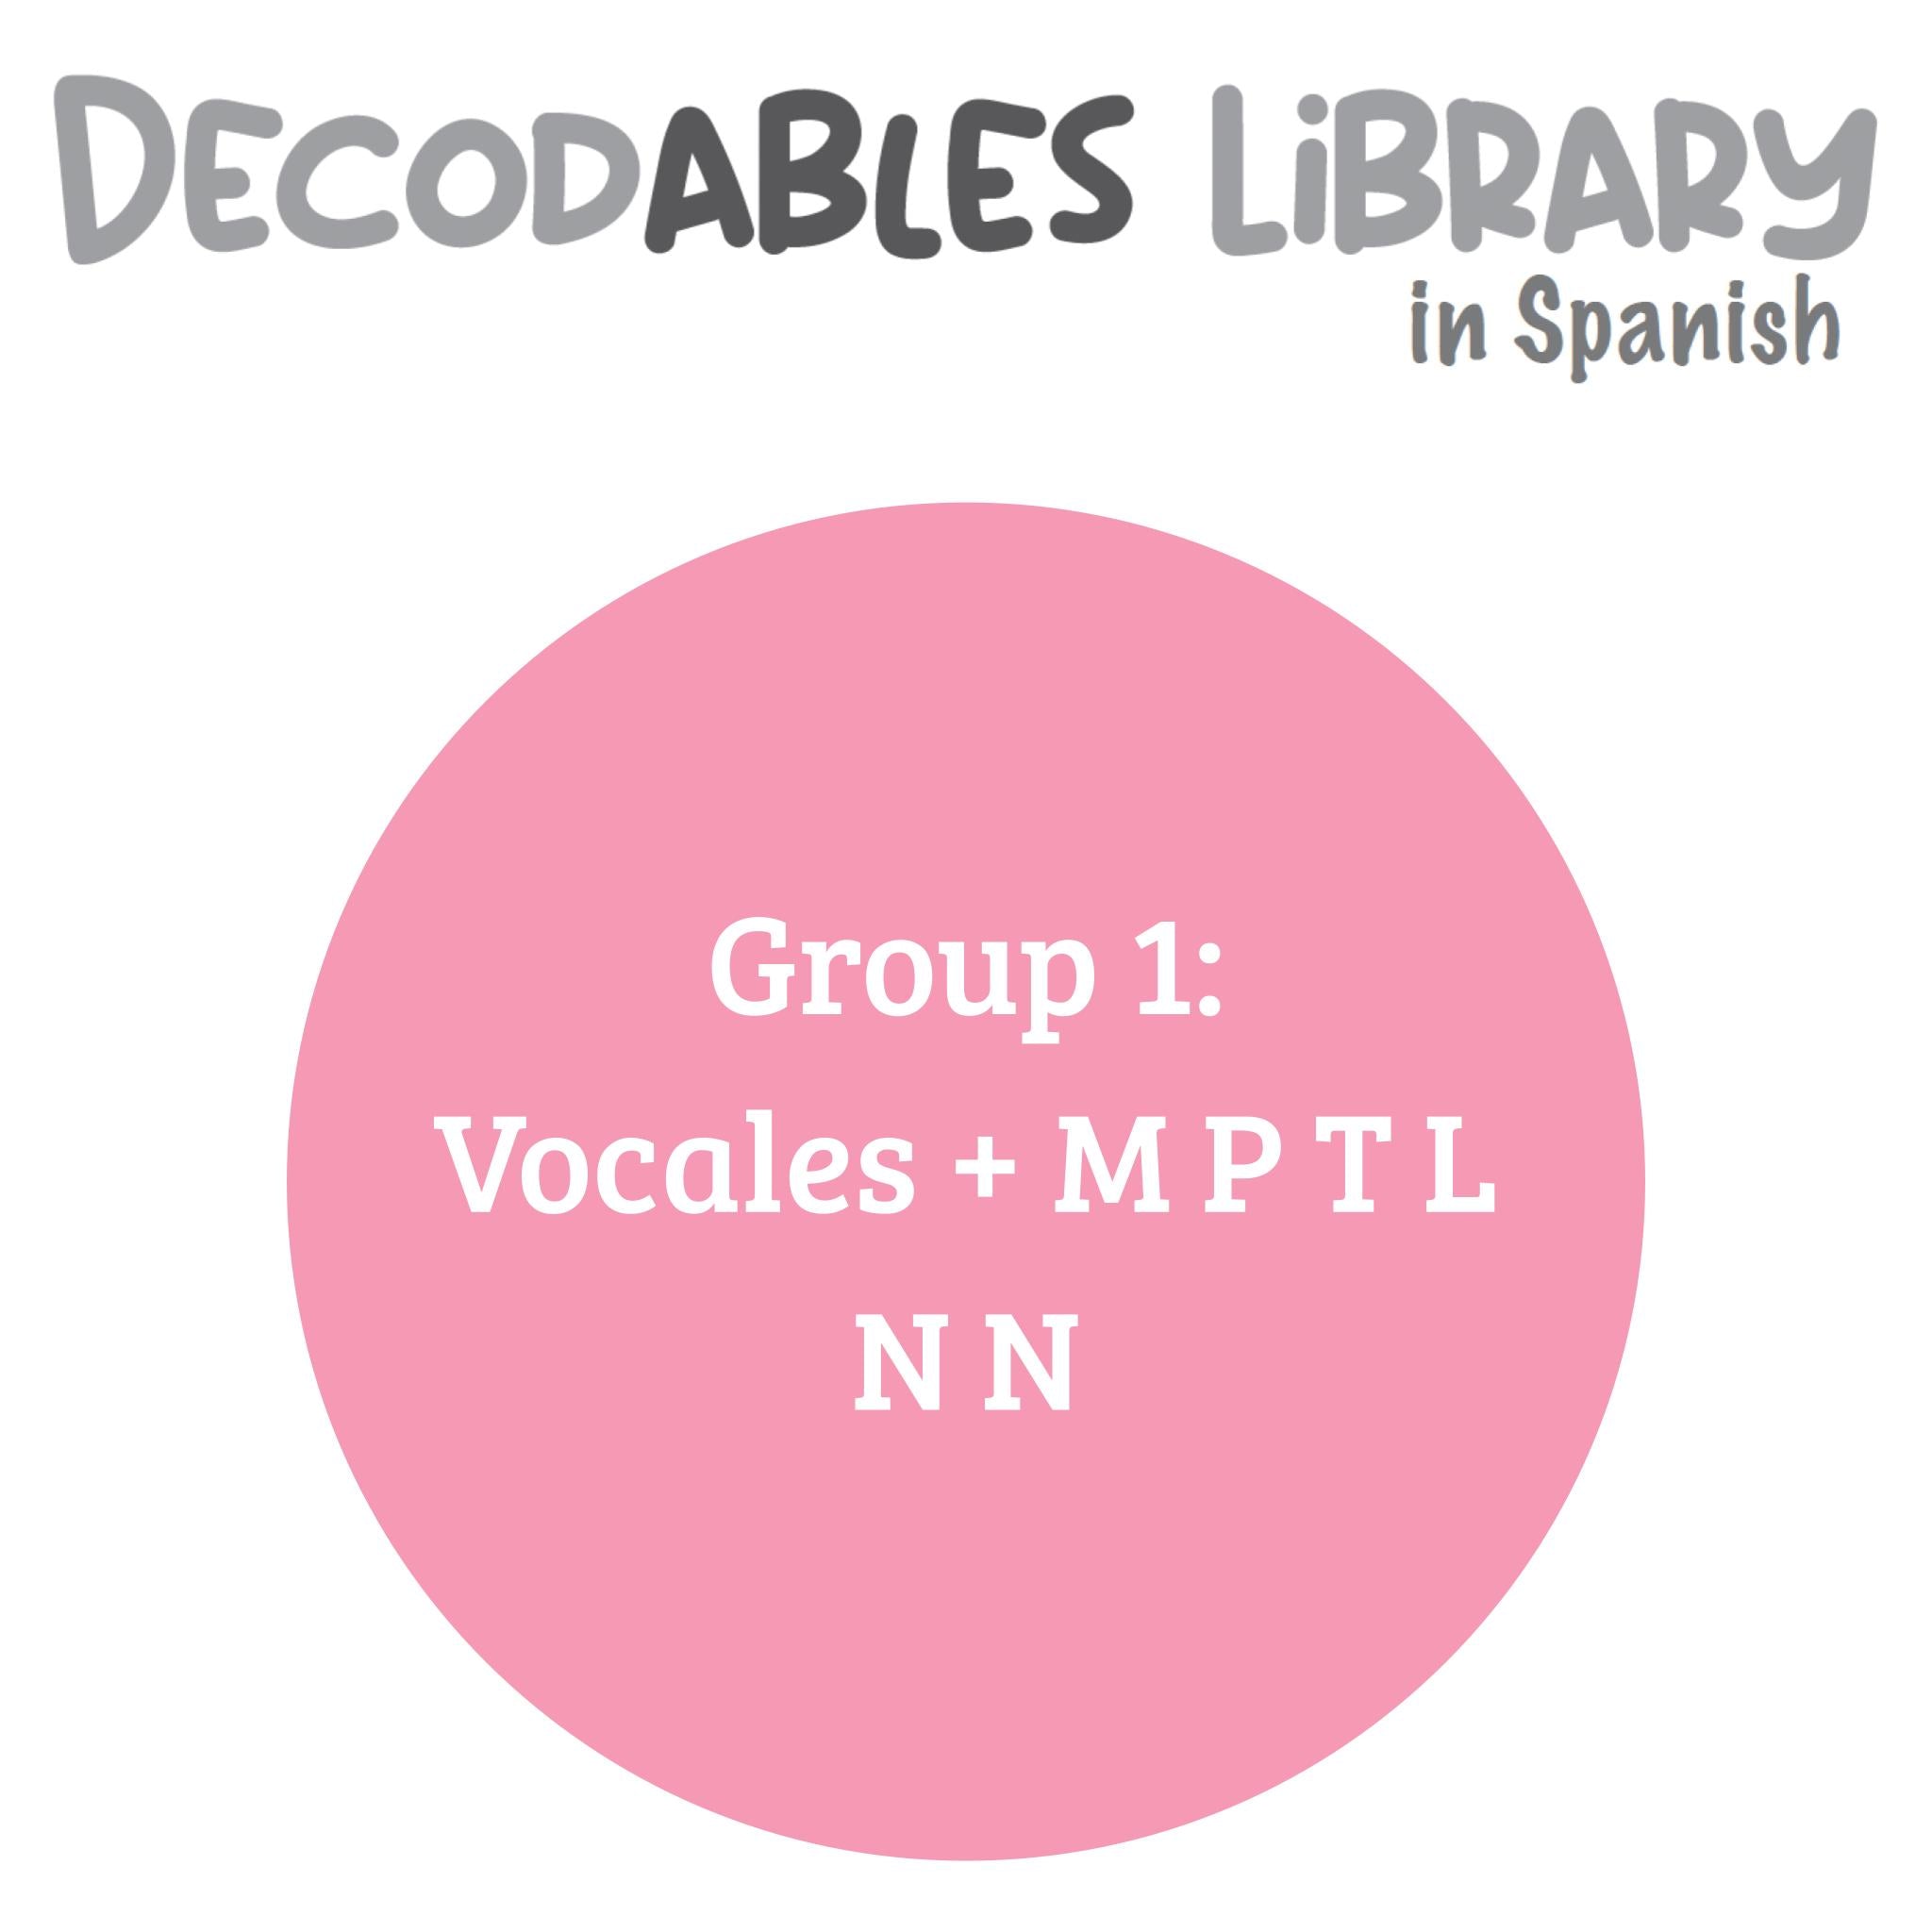 Spanish Decodables Library - Group 1: Vocales + M PT L N N (set of 7 titles)